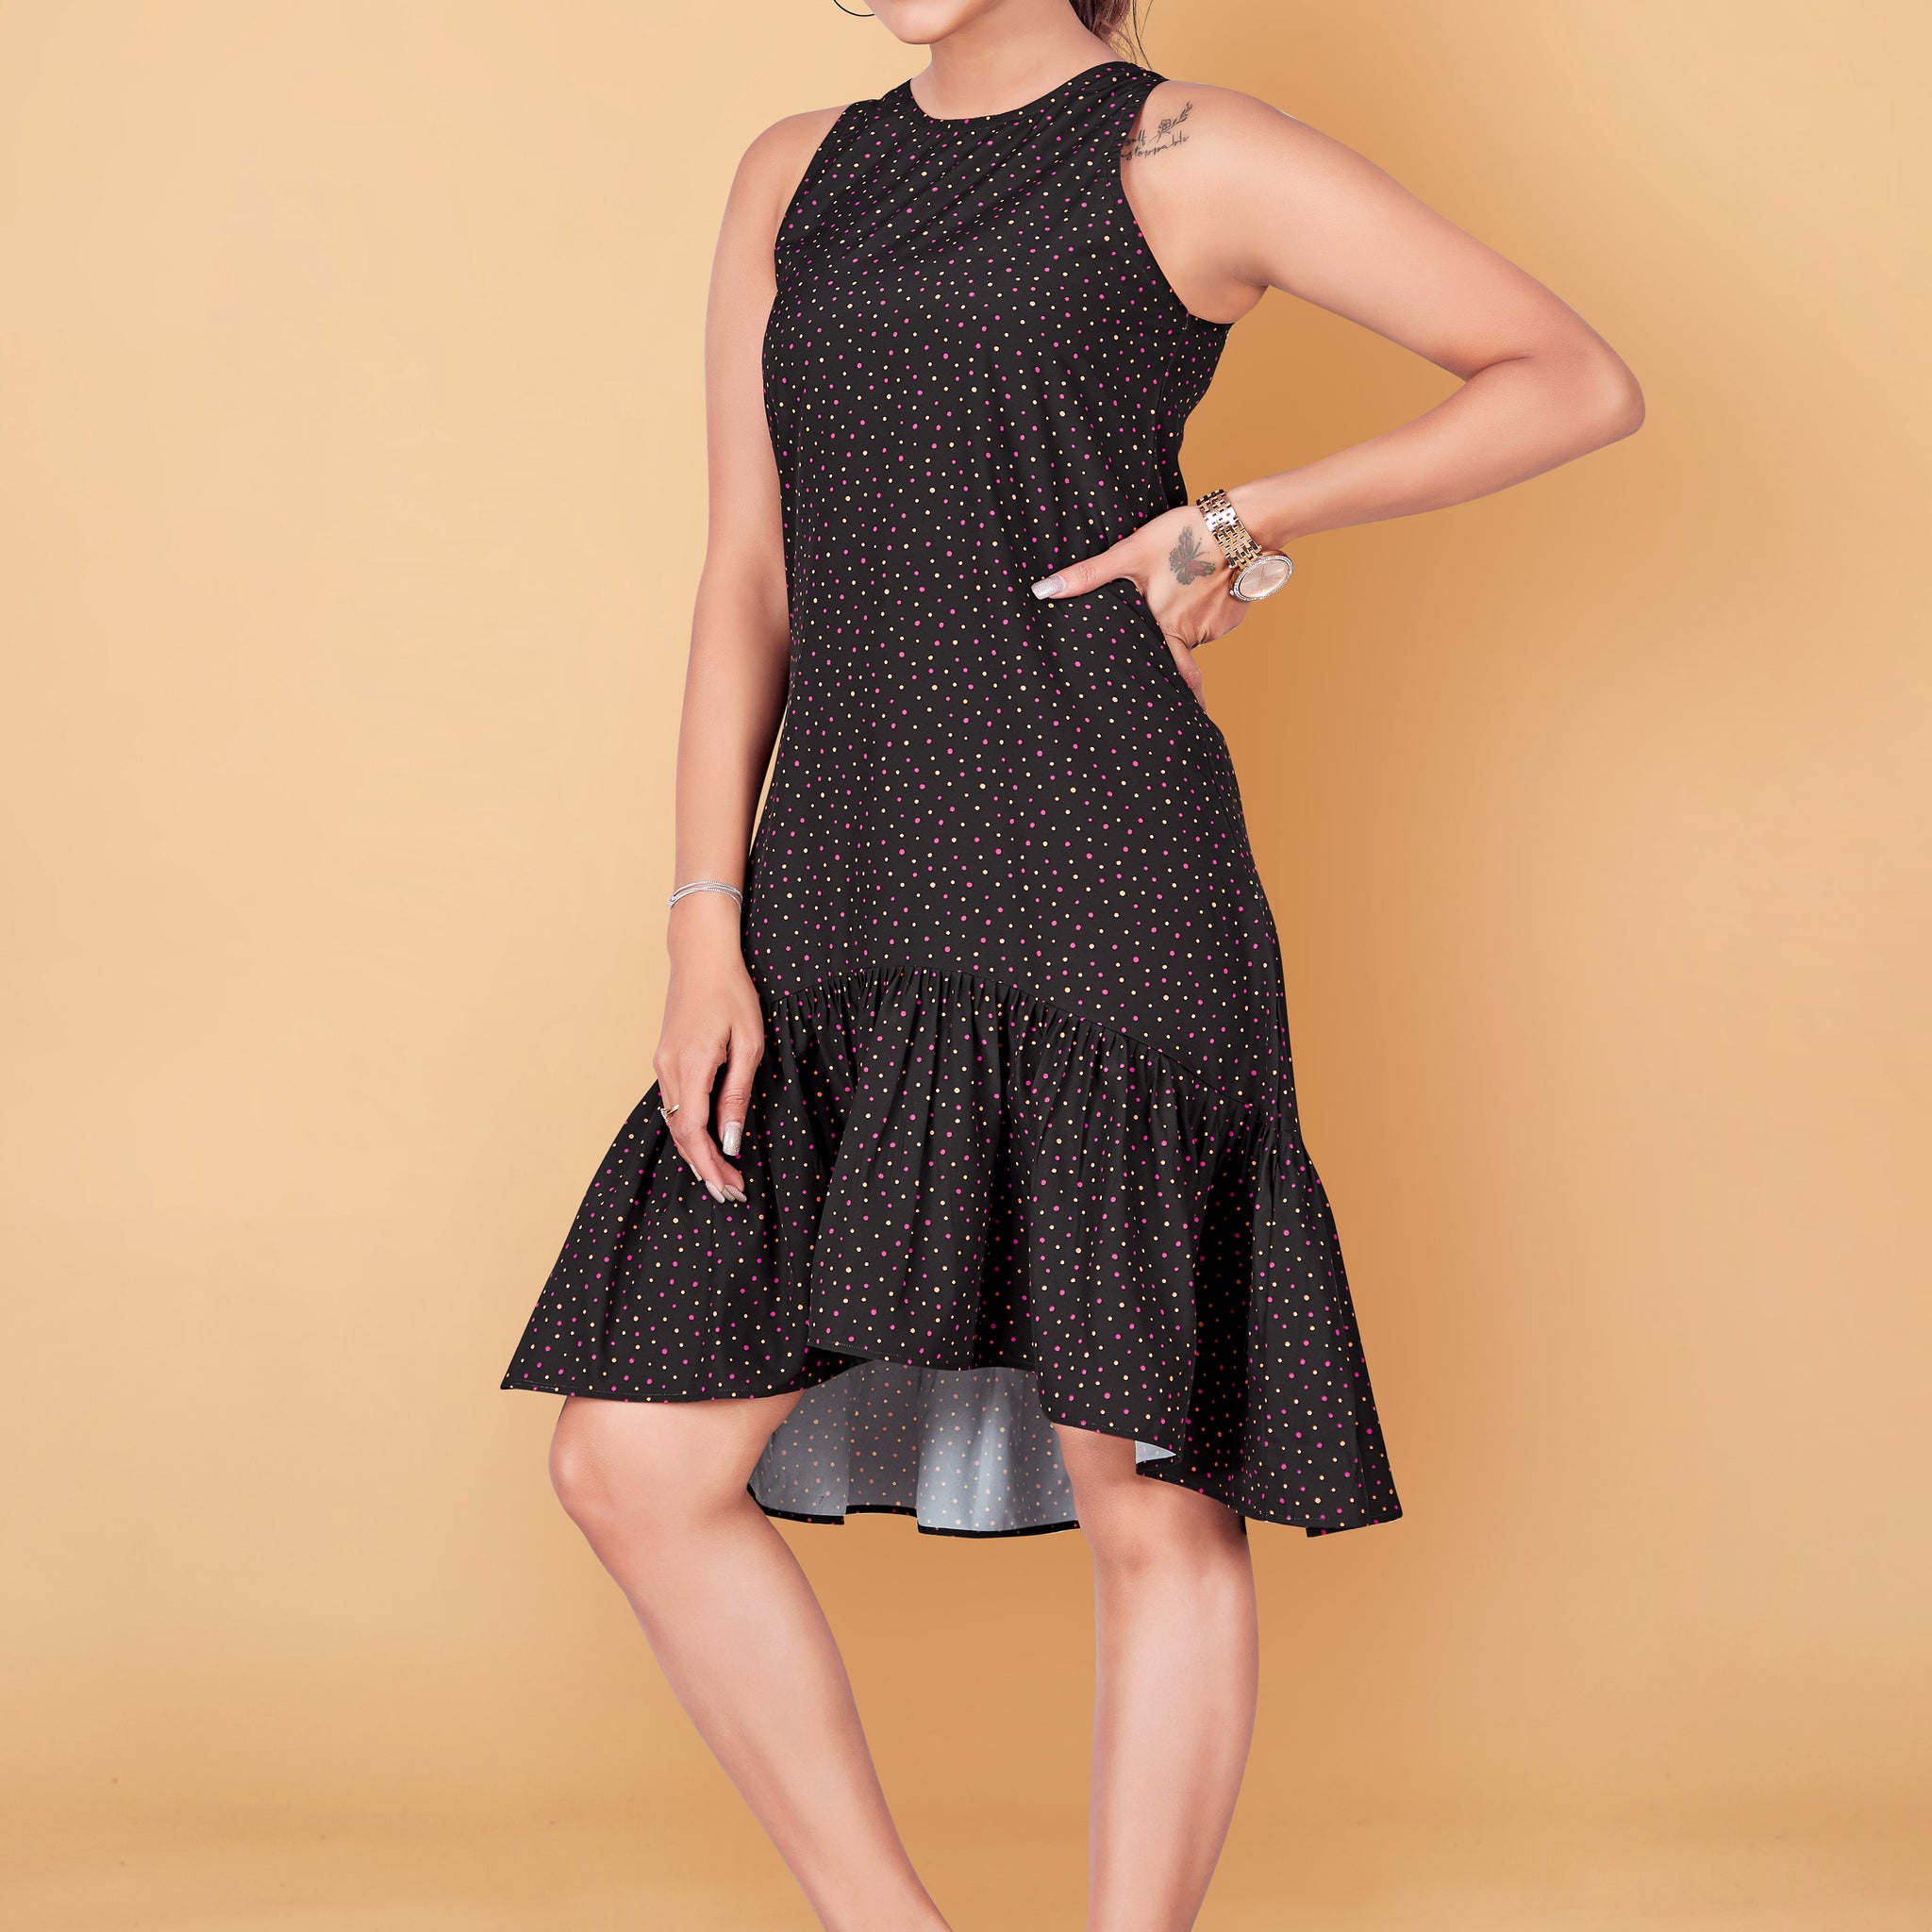 Women’s Black Polyester Blend Up and Down Dresses